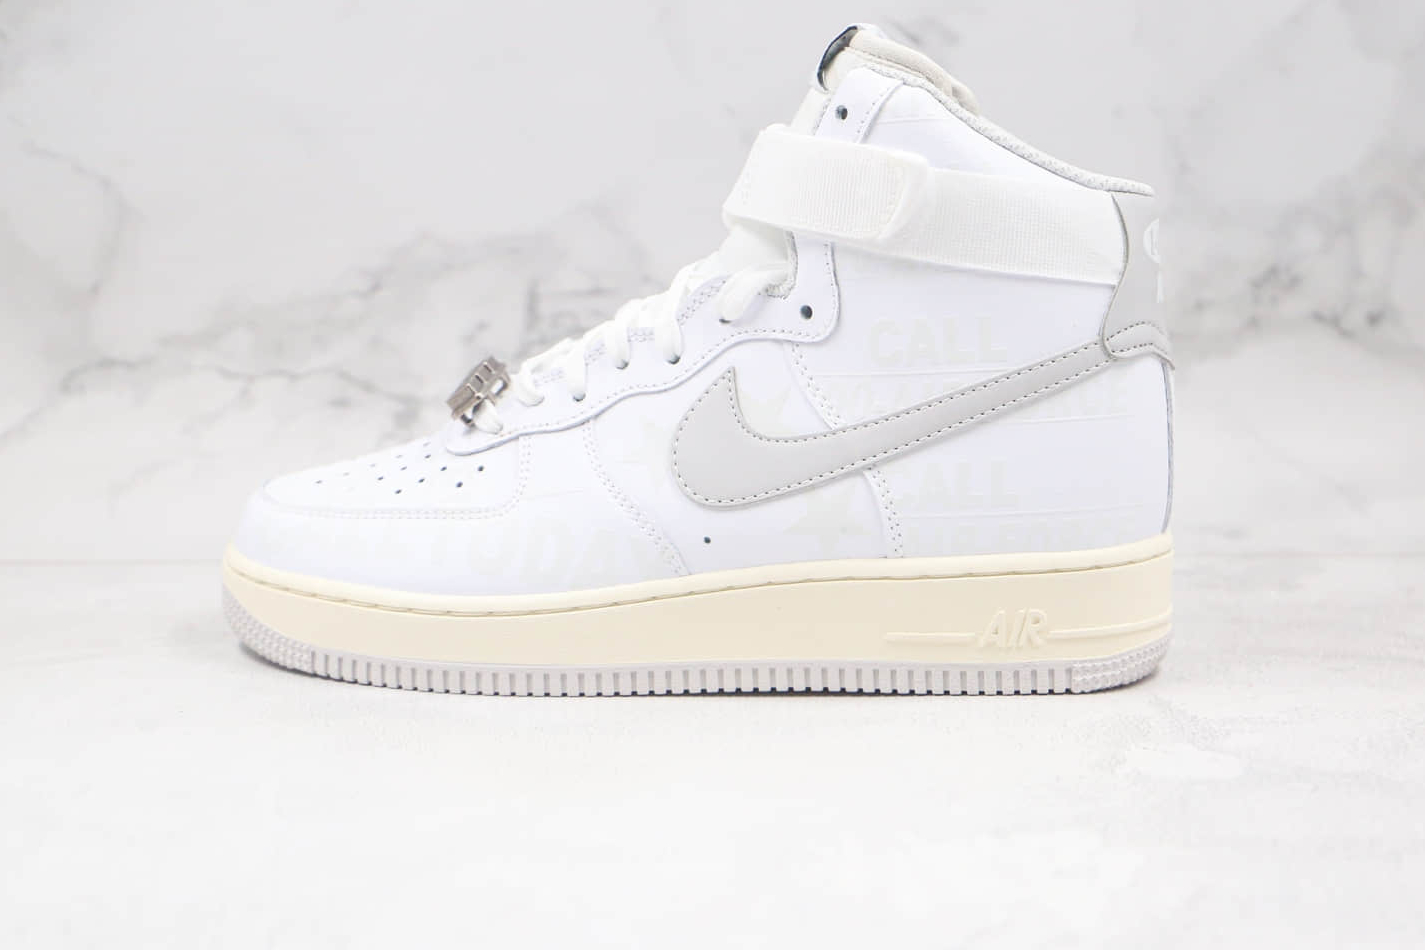 Nike Air Force 1 07 Premium Toll Free White Grey Running Shoes CU1414-100 - High-Quality Athletic Footwear